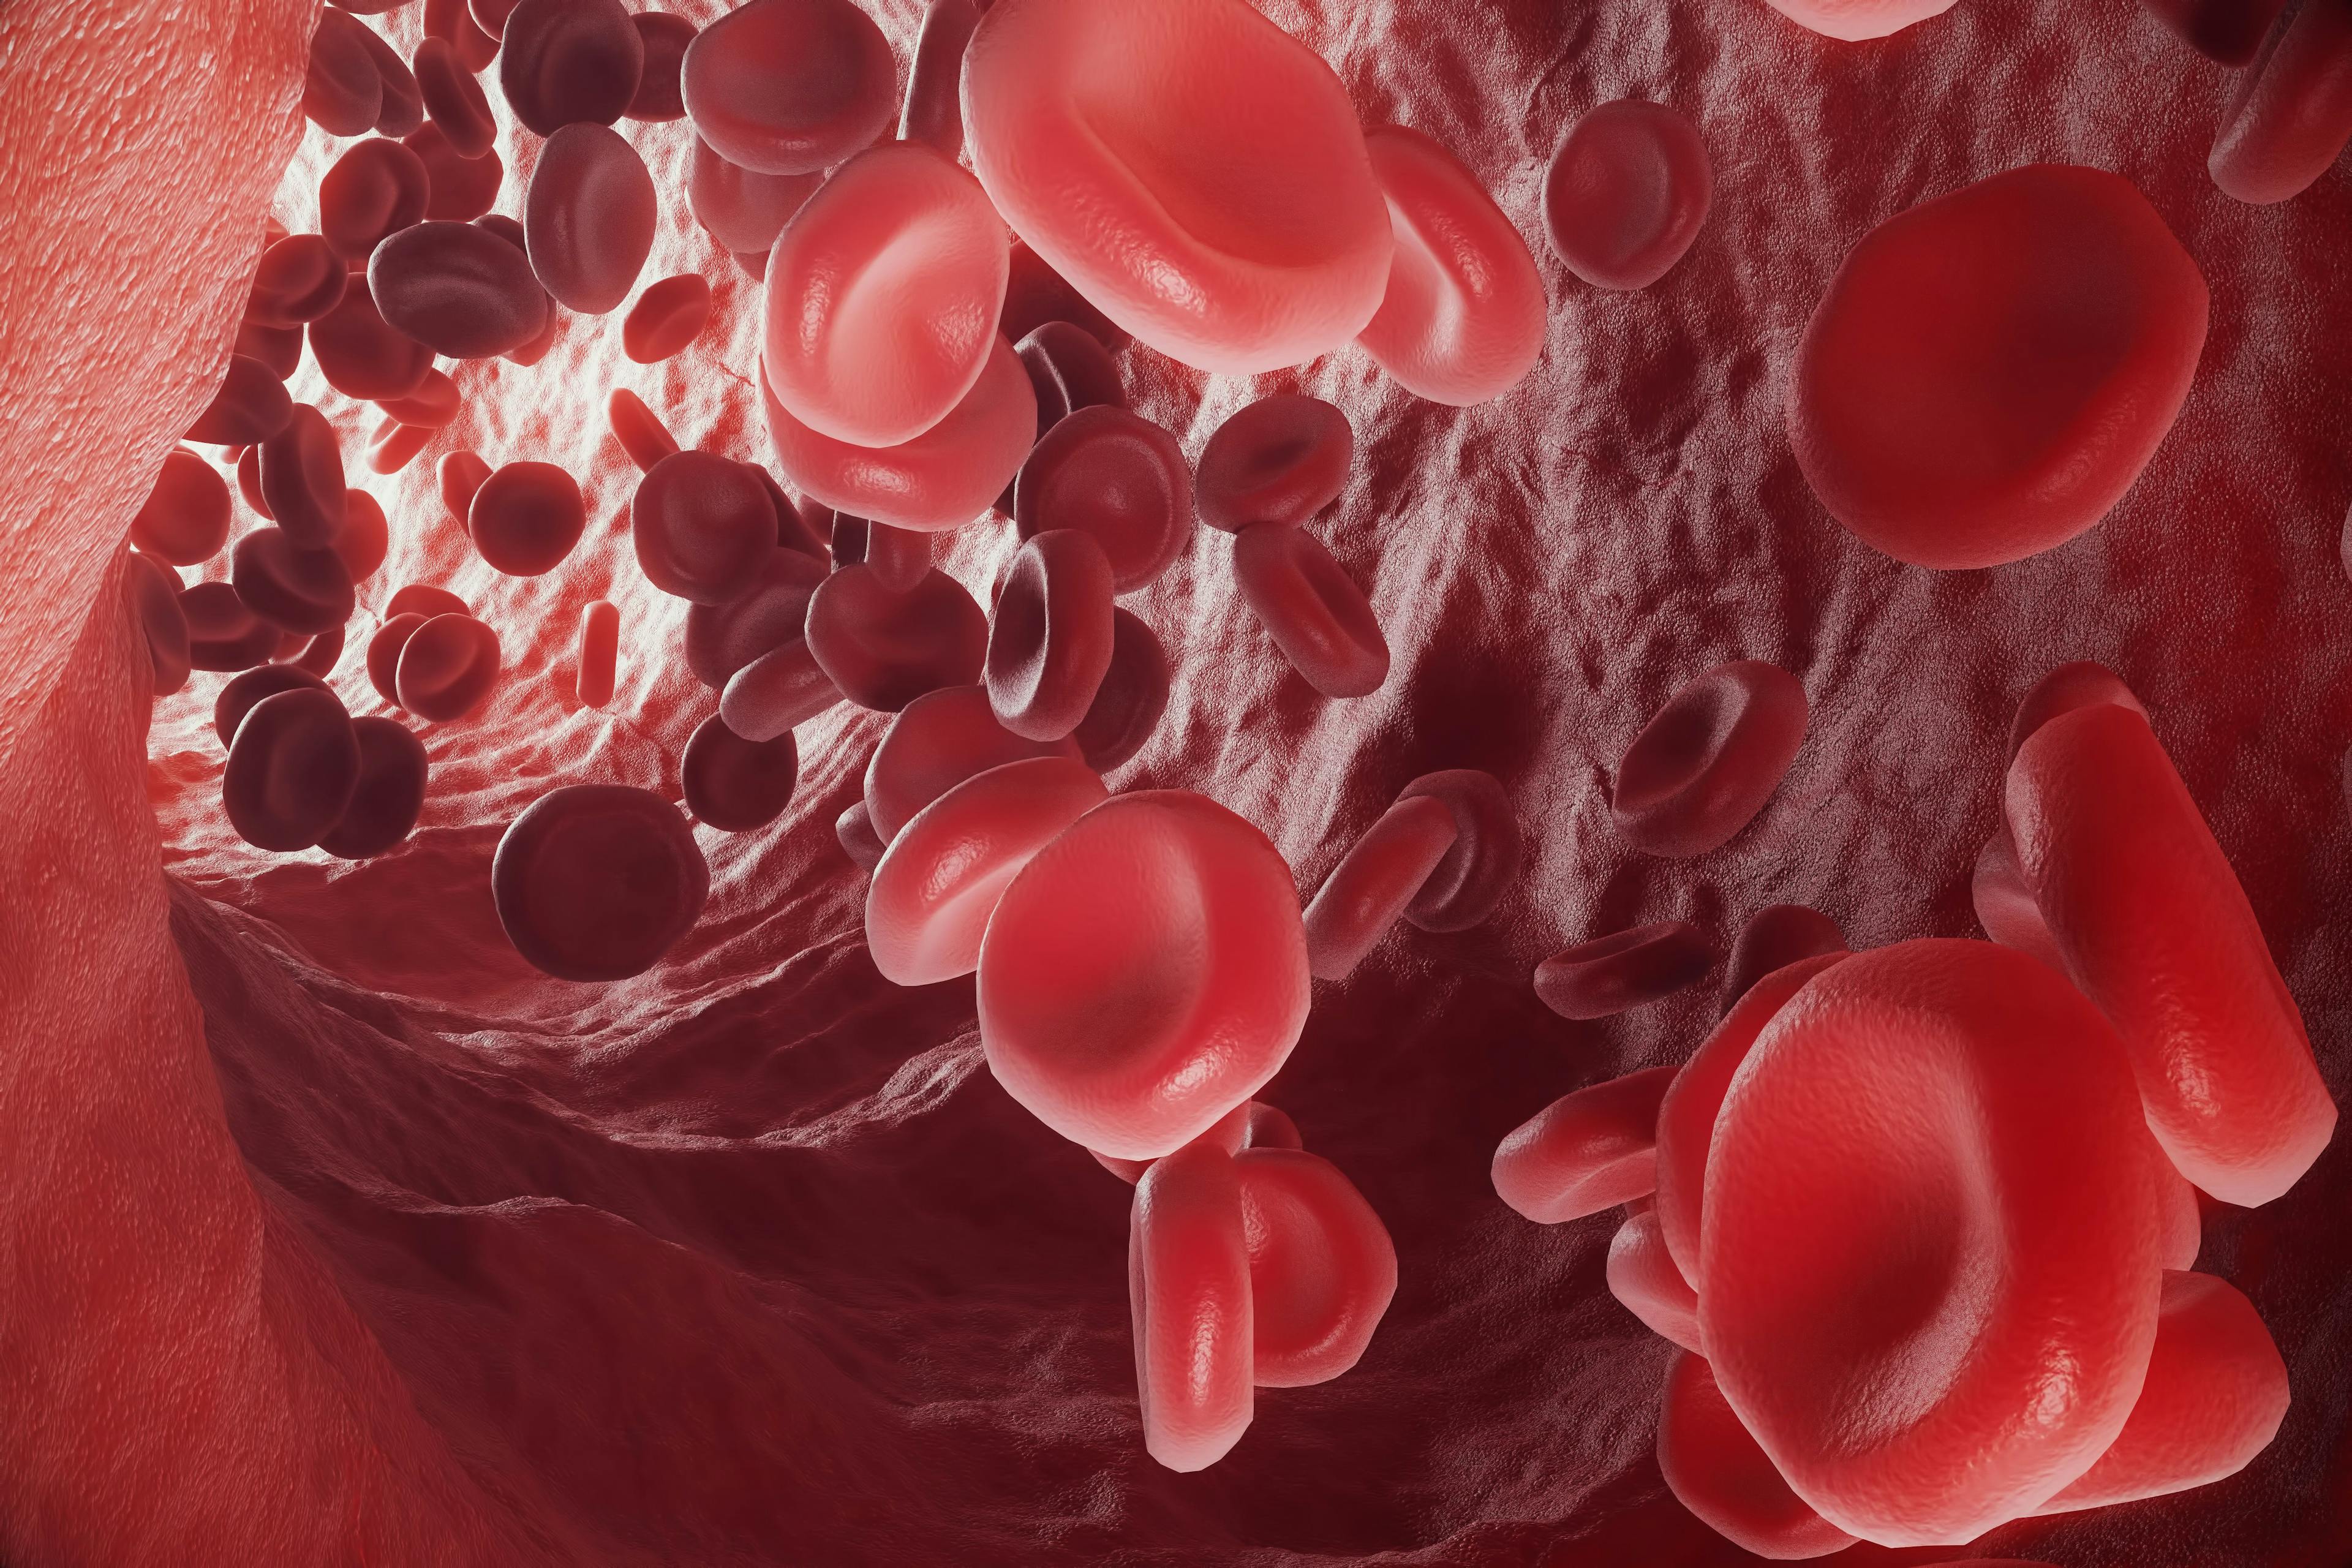 Patients with high-risk polycythemia vera had a worse survival probability at 4 years compared to patients with low-risk disease.